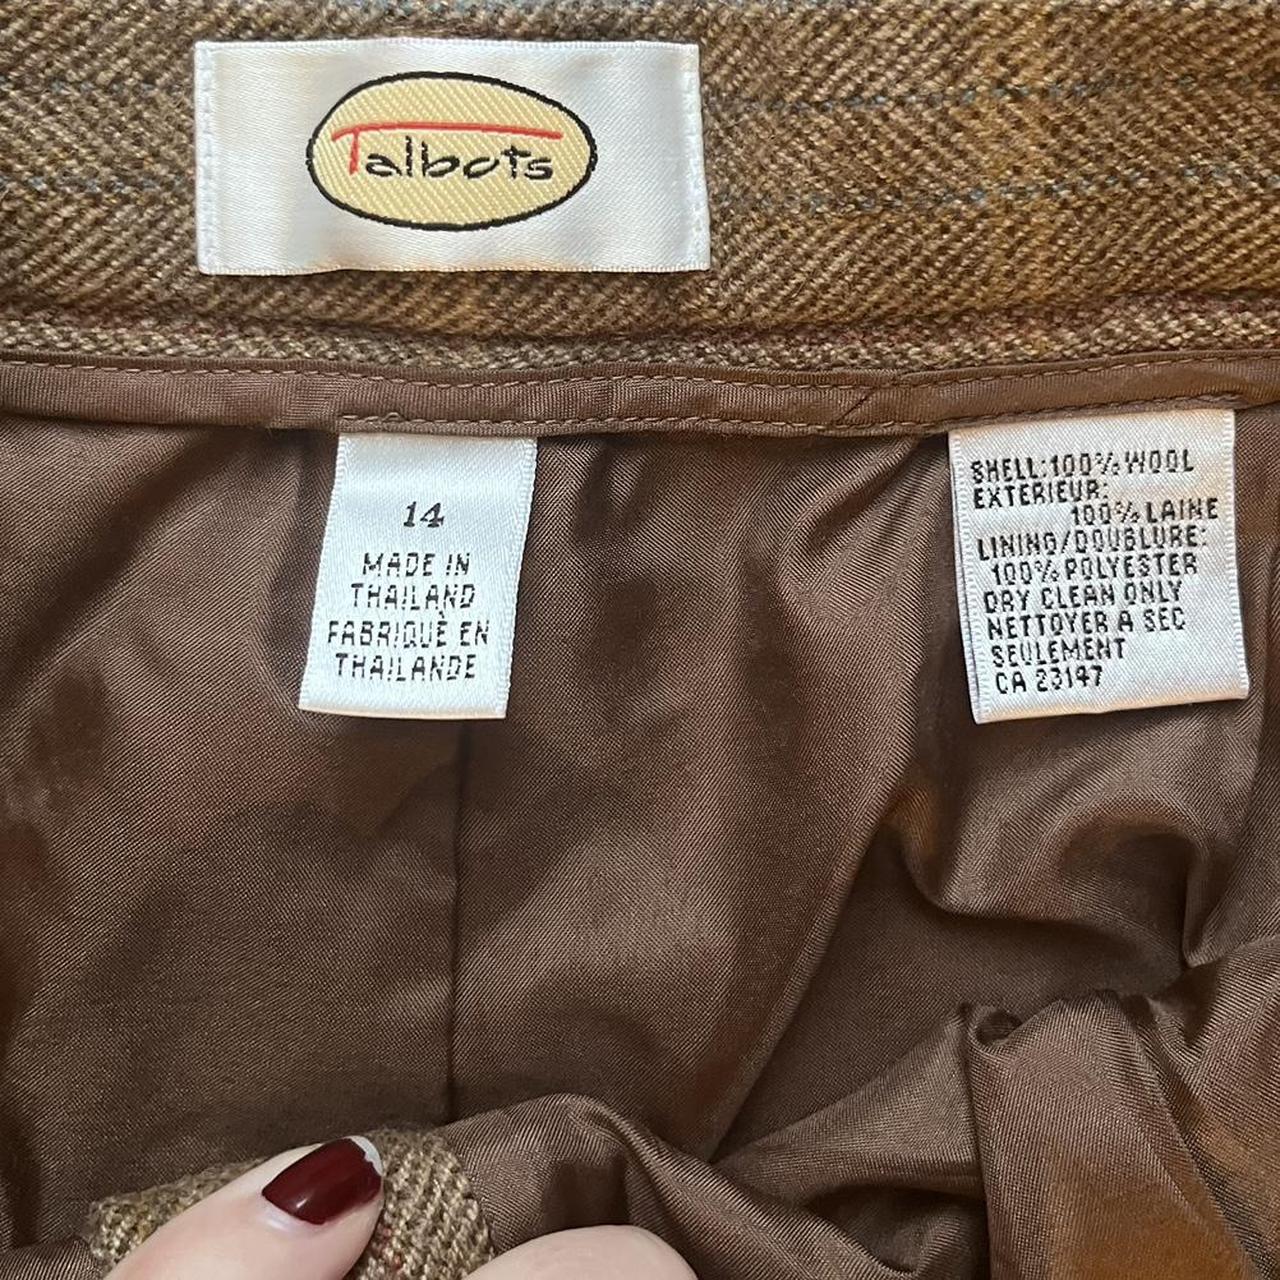 Talbots Women's Brown and Tan Trousers (5)